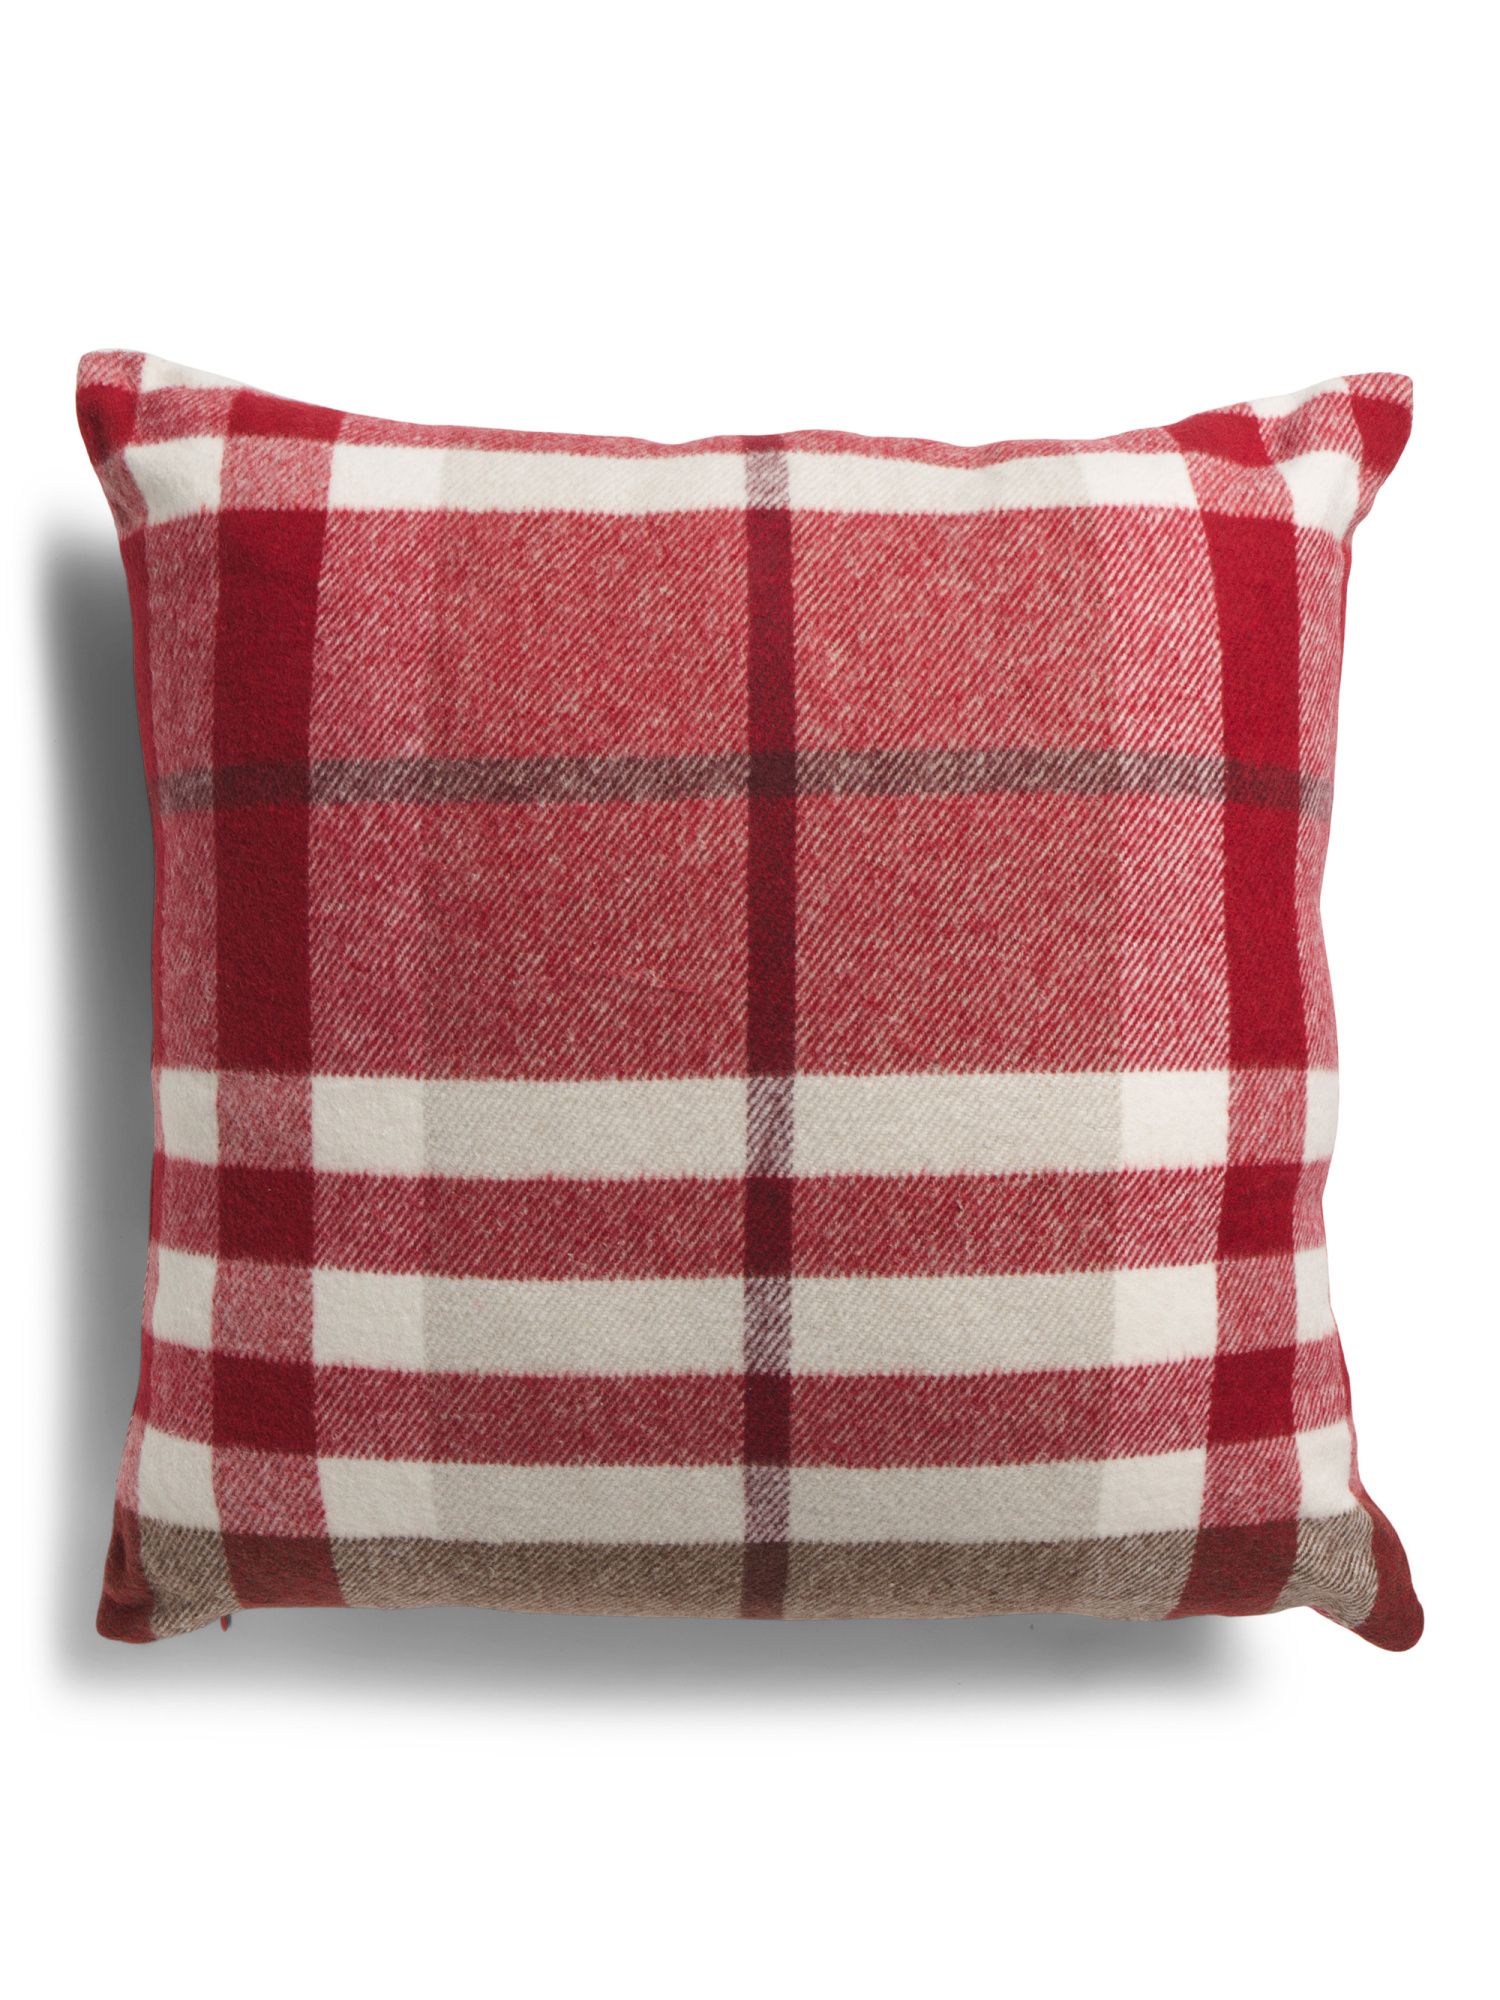 Made In Portugal 24x24 Oversized Plaid Pillow | Pillows & Decor | Marshalls | Marshalls